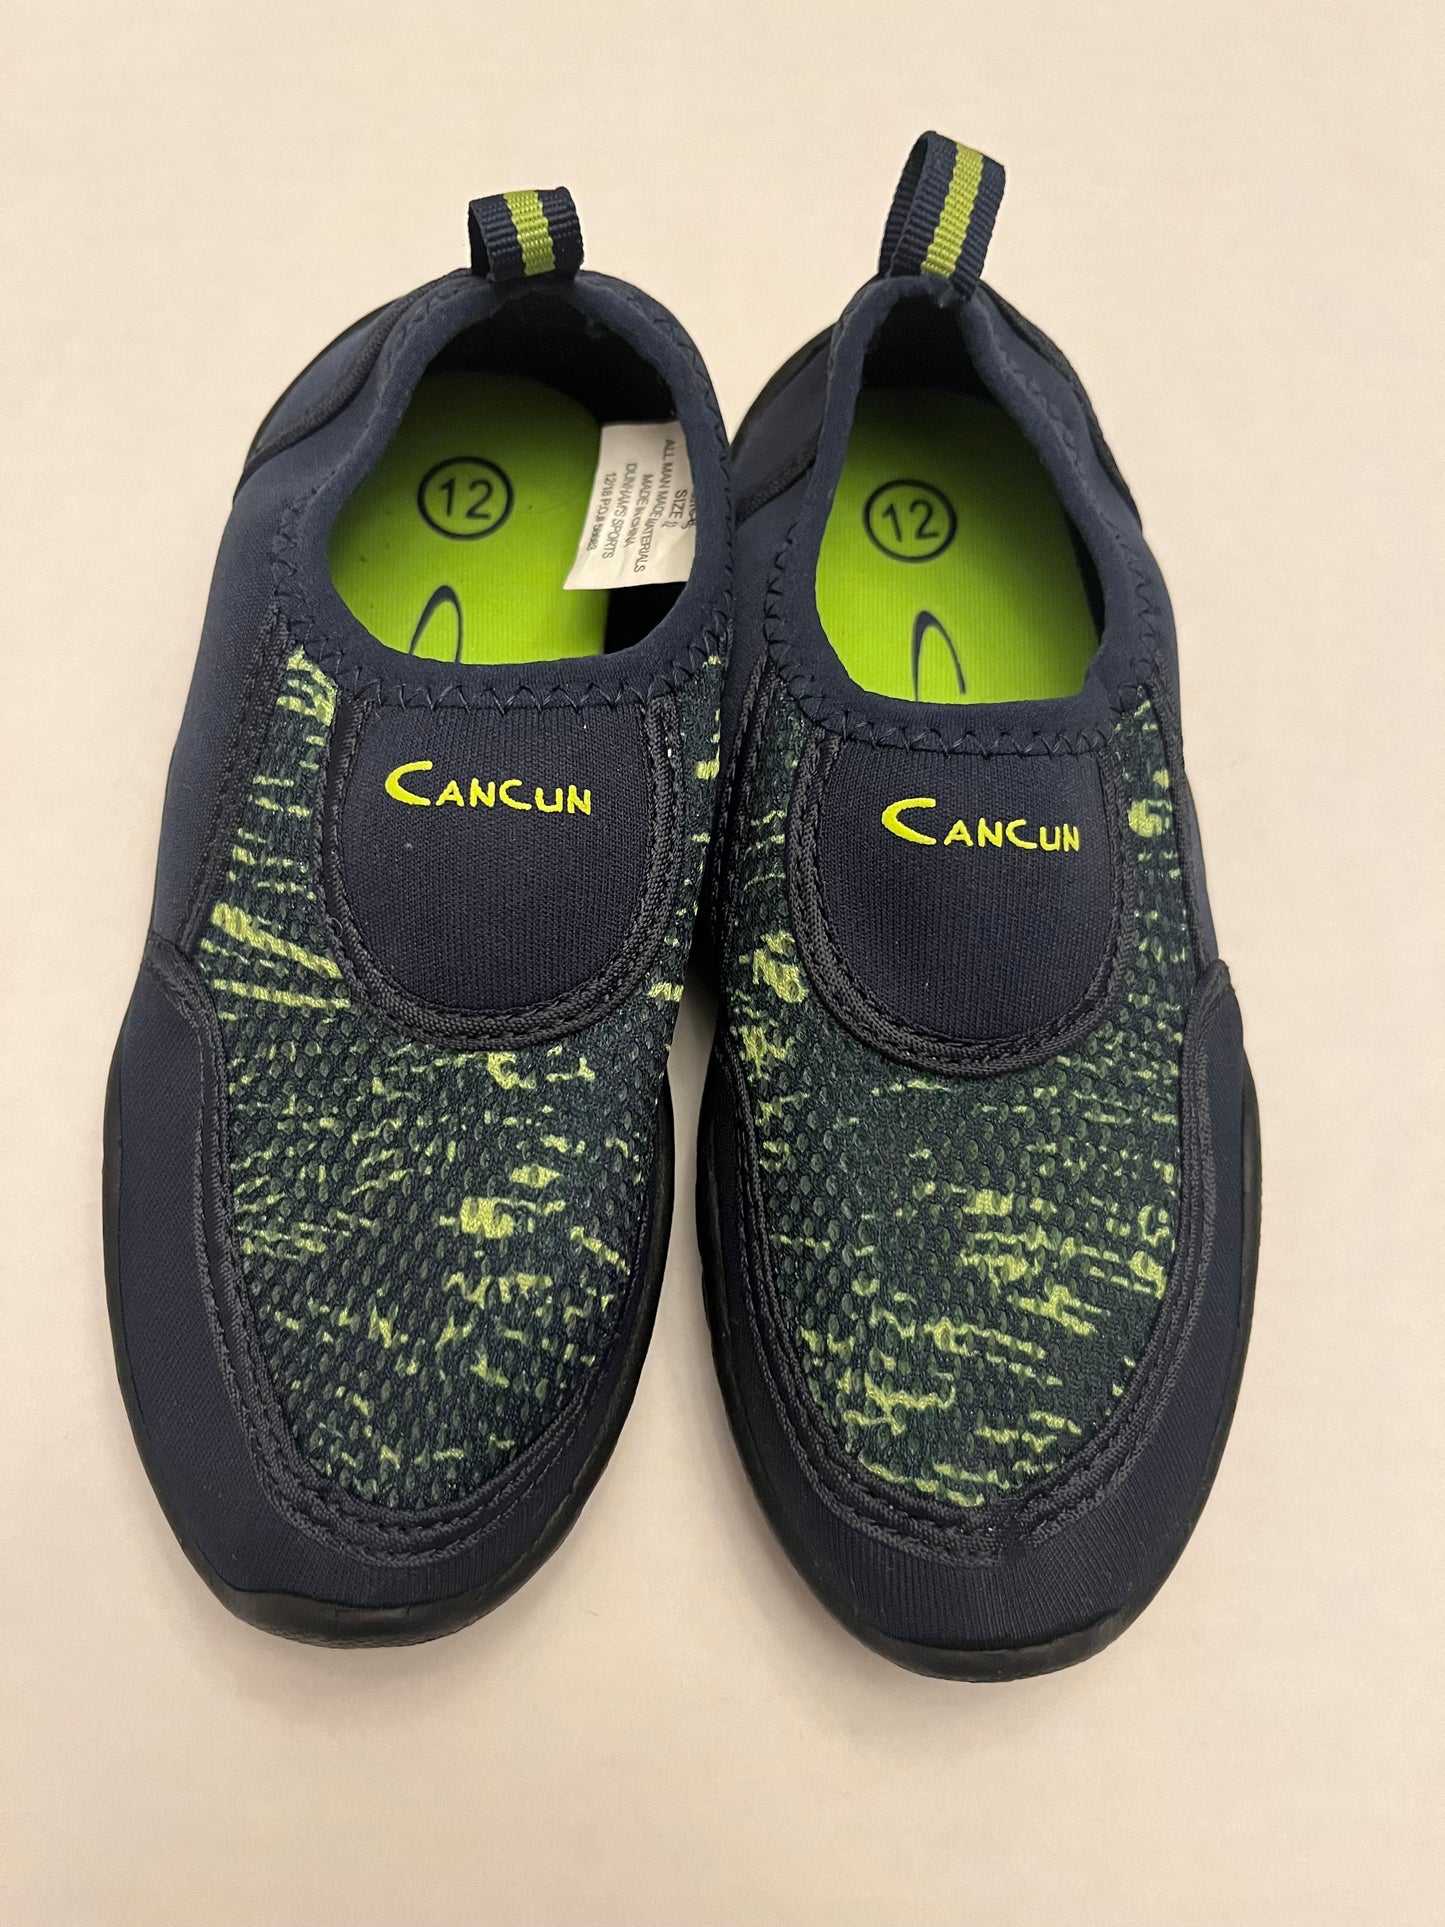 Cancun water shoes size 12 PPU Mariemont